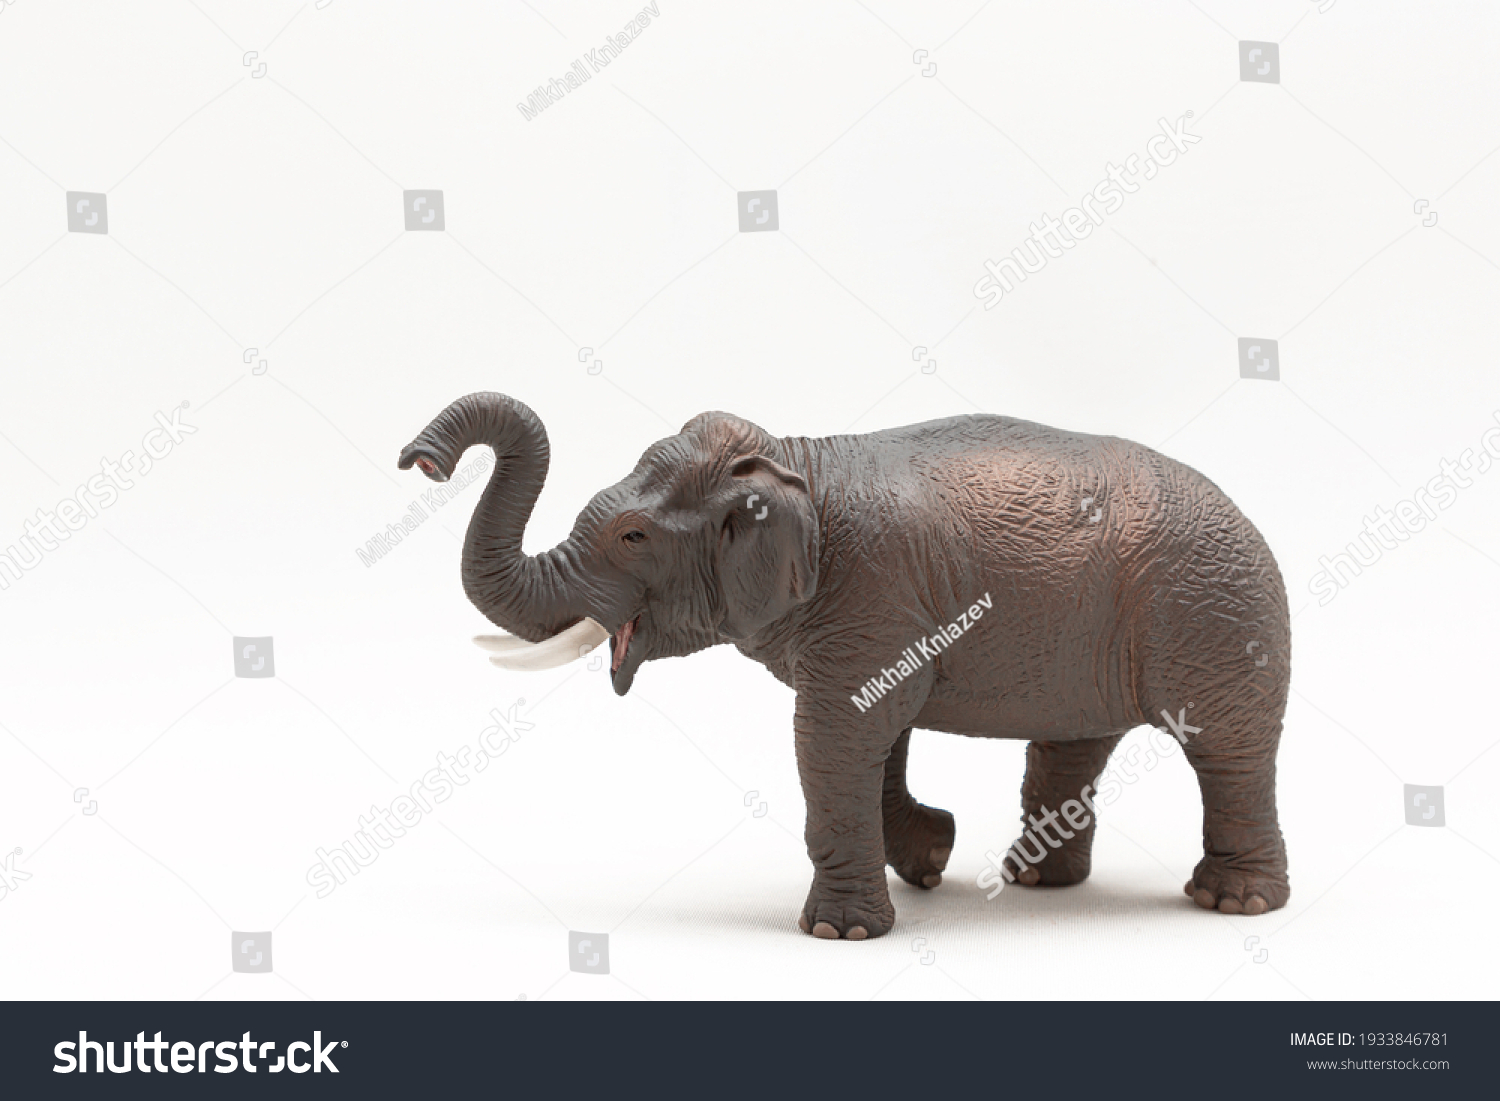 Realistic miniature elephant figure isolated on a white background. Elephant Toy. Copy space #1933846781